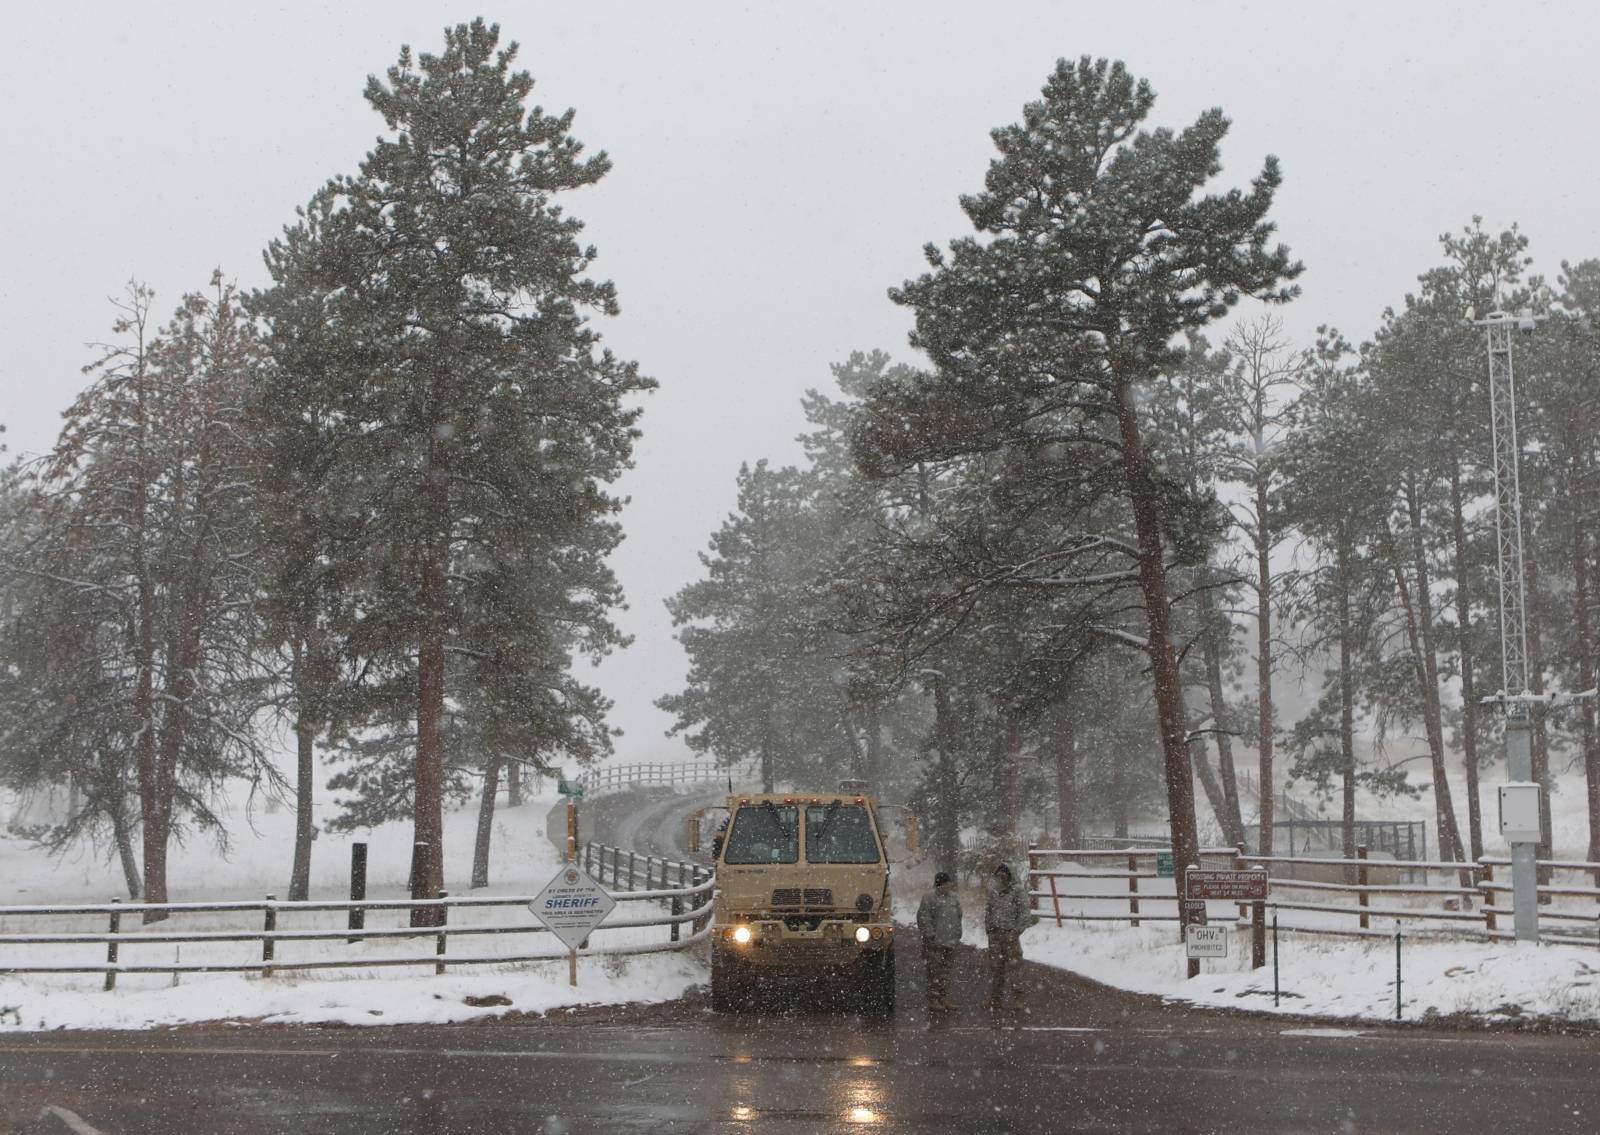 Central U.S. goes from heatwave to winter in a day as snowstorm rolls through the region